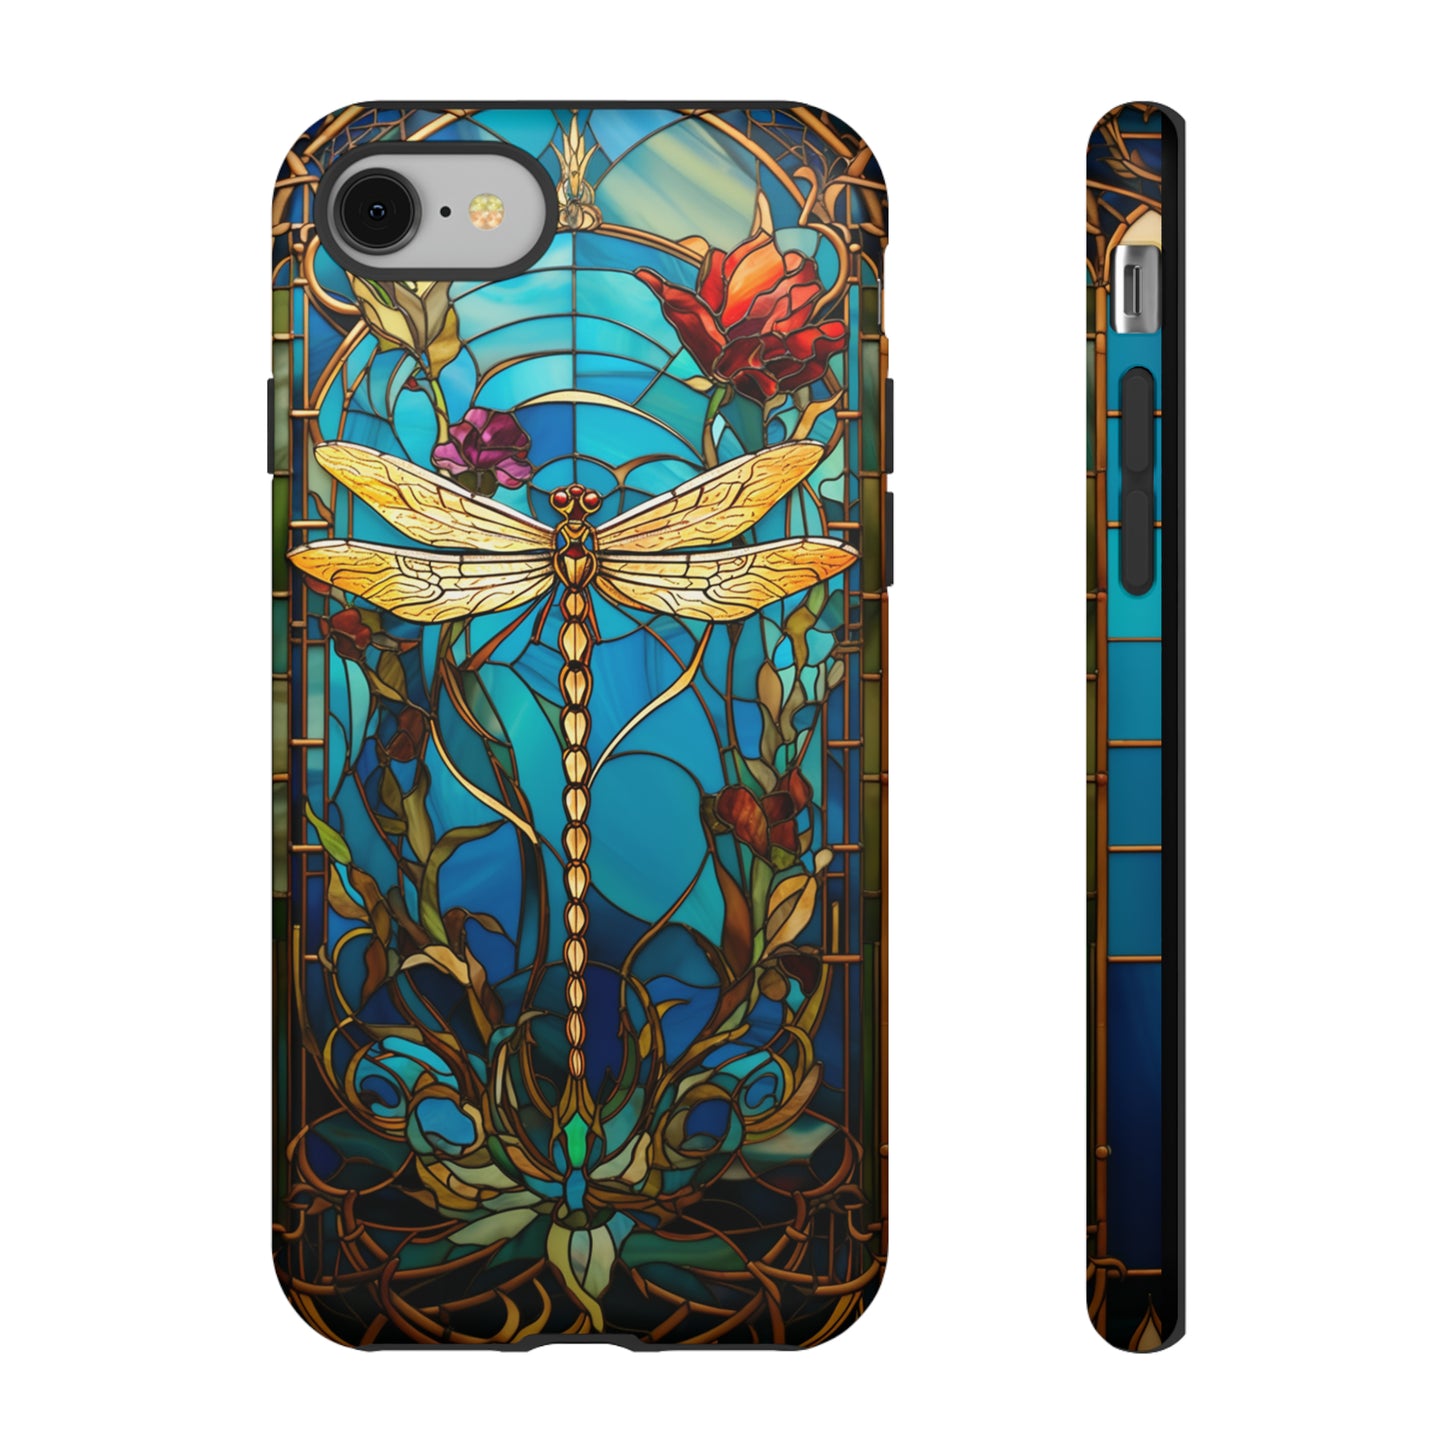 Art Nouveau Inspired iPhone Case with Stained Glass Motif